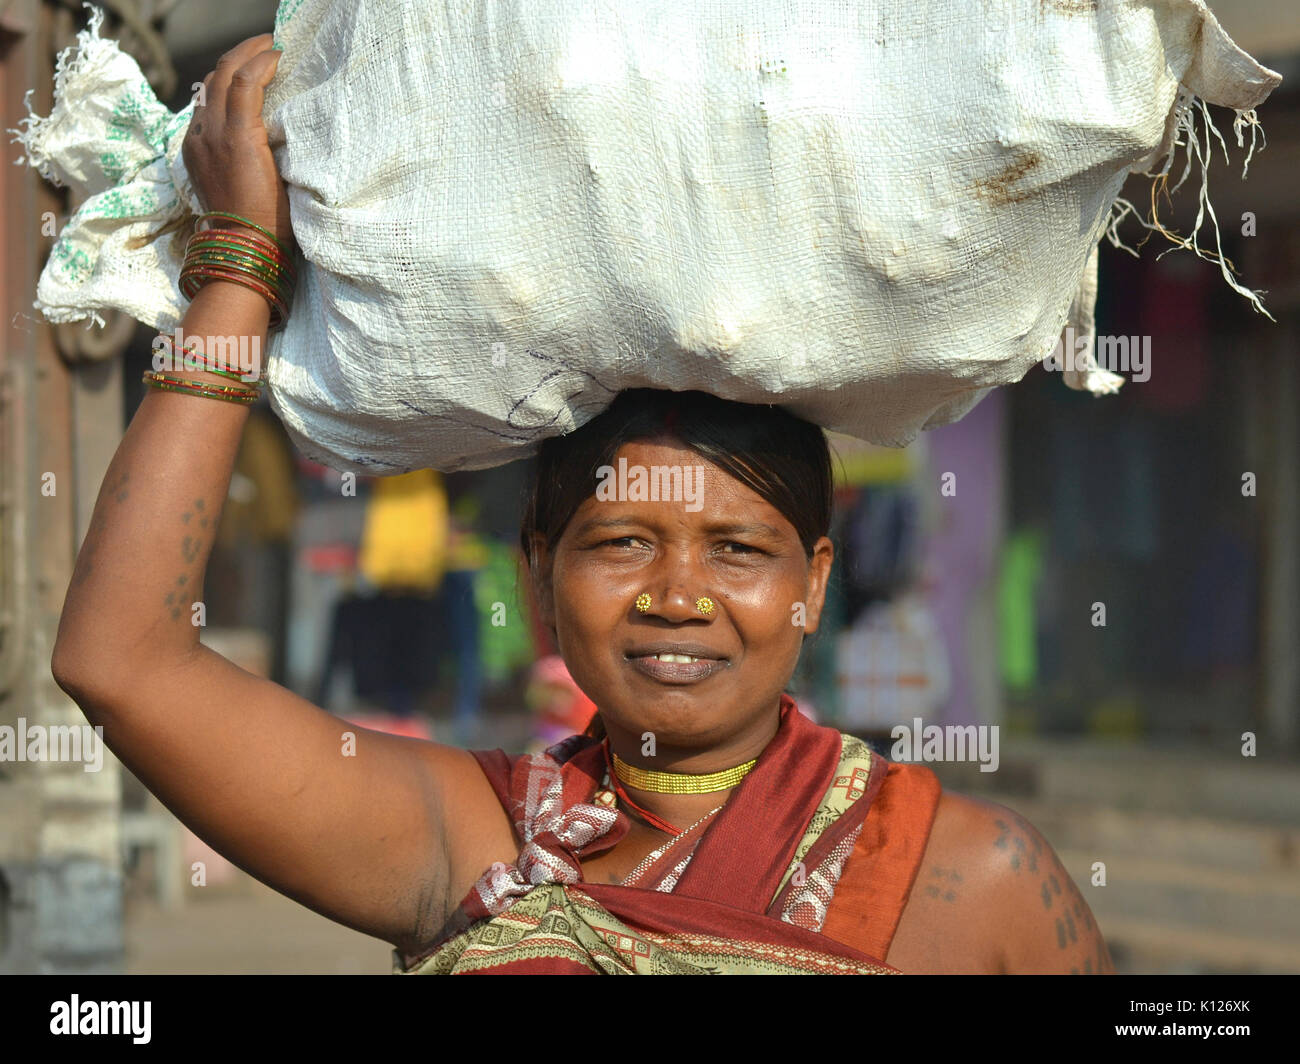 Indian Adivasi woman (tribal woman) with two distinctive golden nose studs balances on her head a heavy bag of vegetables and smiles for the camera. Stock Photo